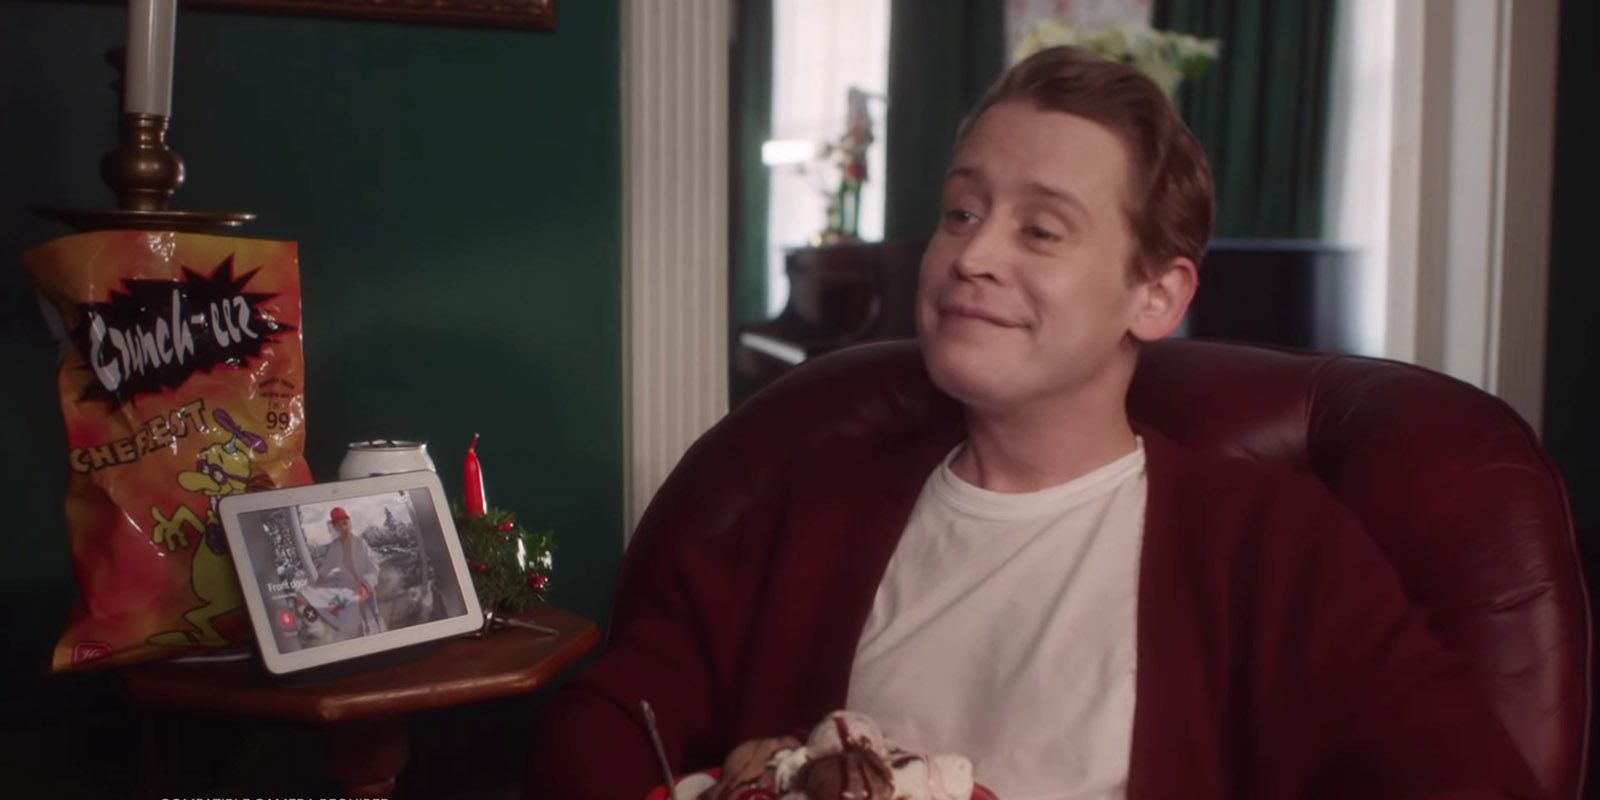 Home Alone's Macaulay Culkin Is Back as Kevin McCallister in New Video